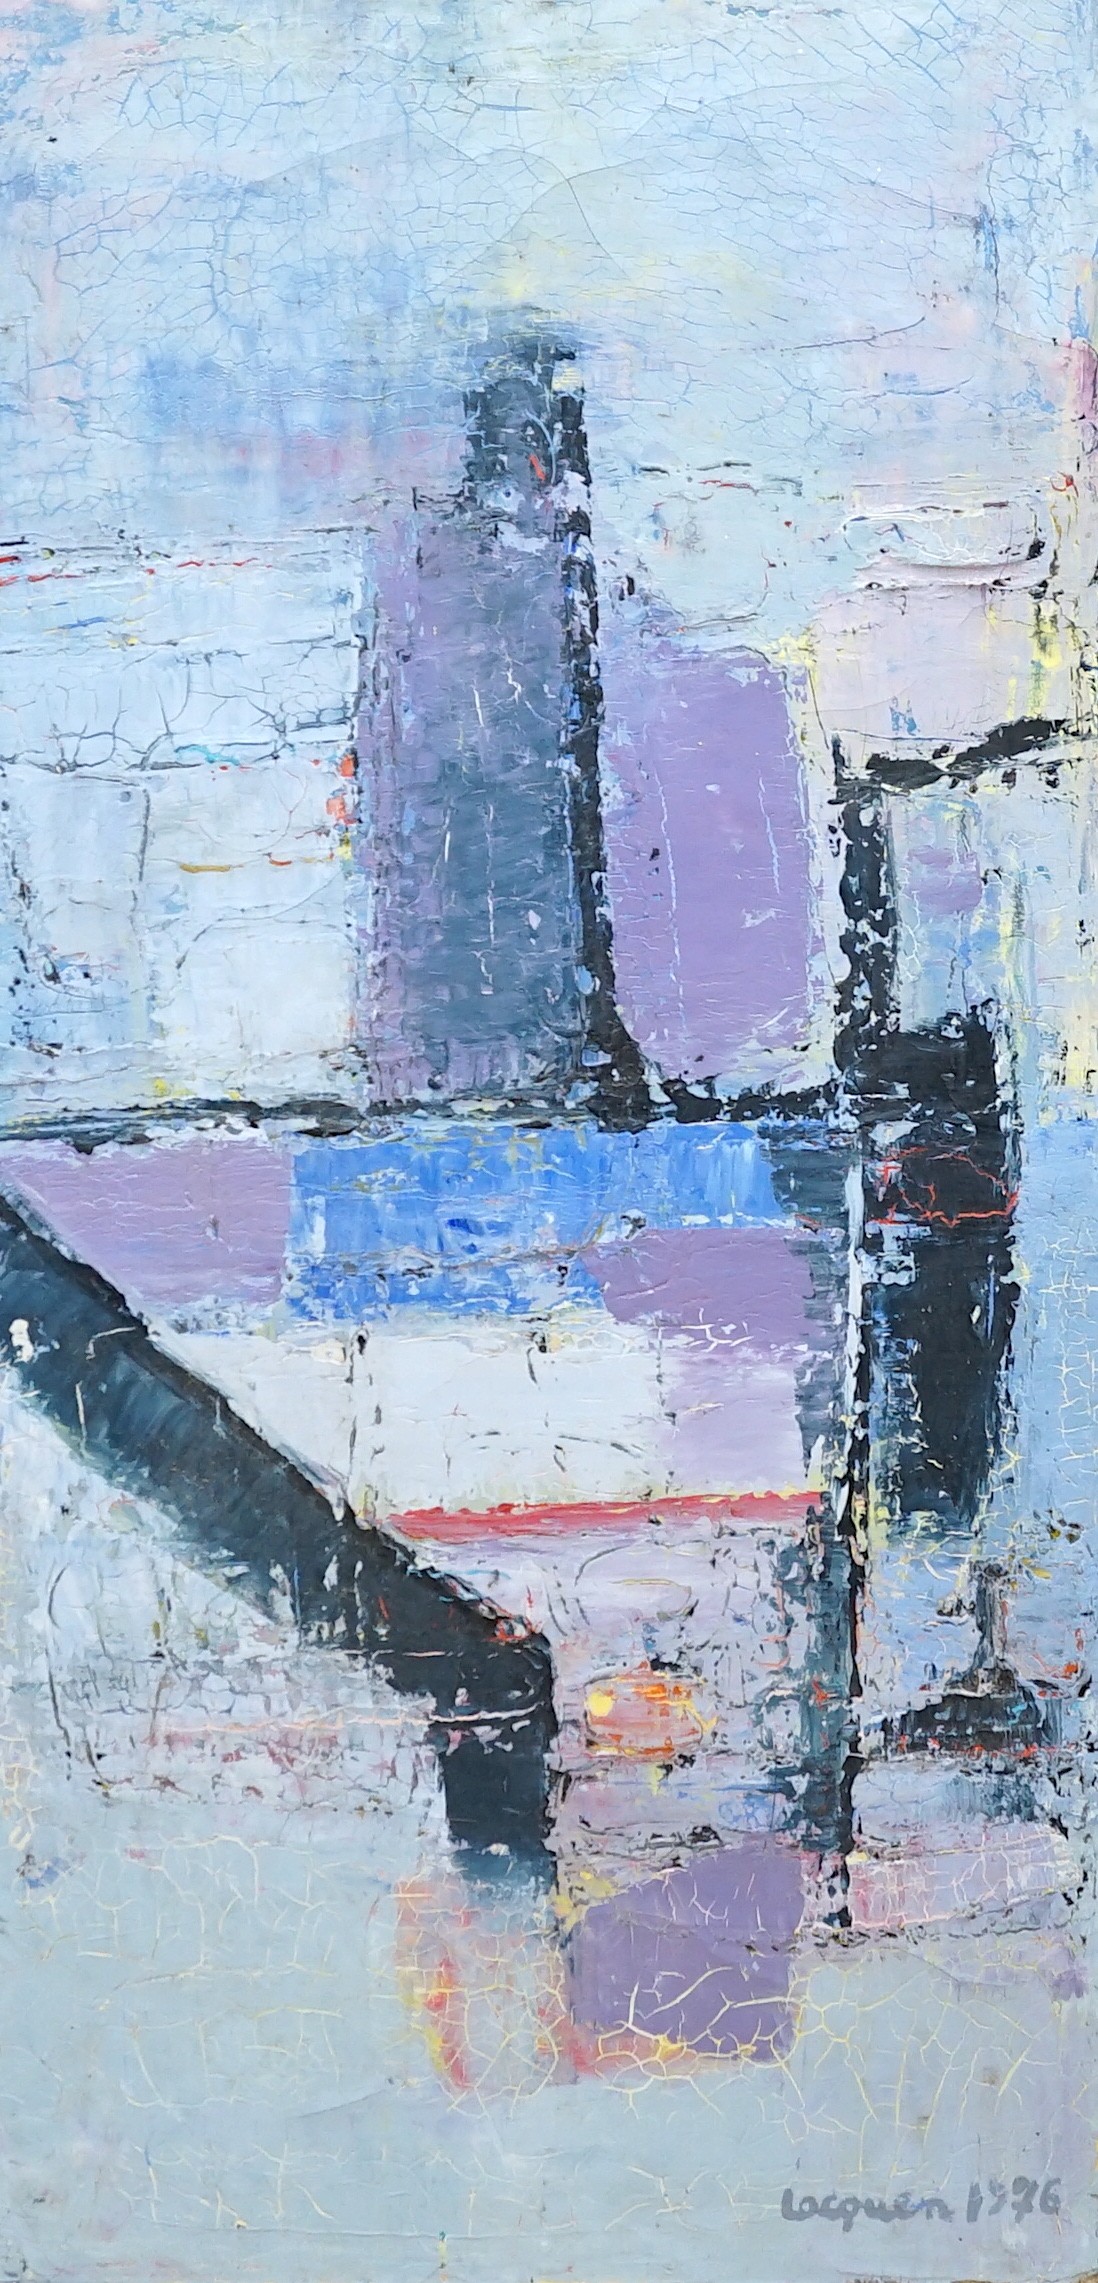 Modern British, oil on canvas, Abstract, signed Locquen and dated 1976, 80 x 40cm, unframed